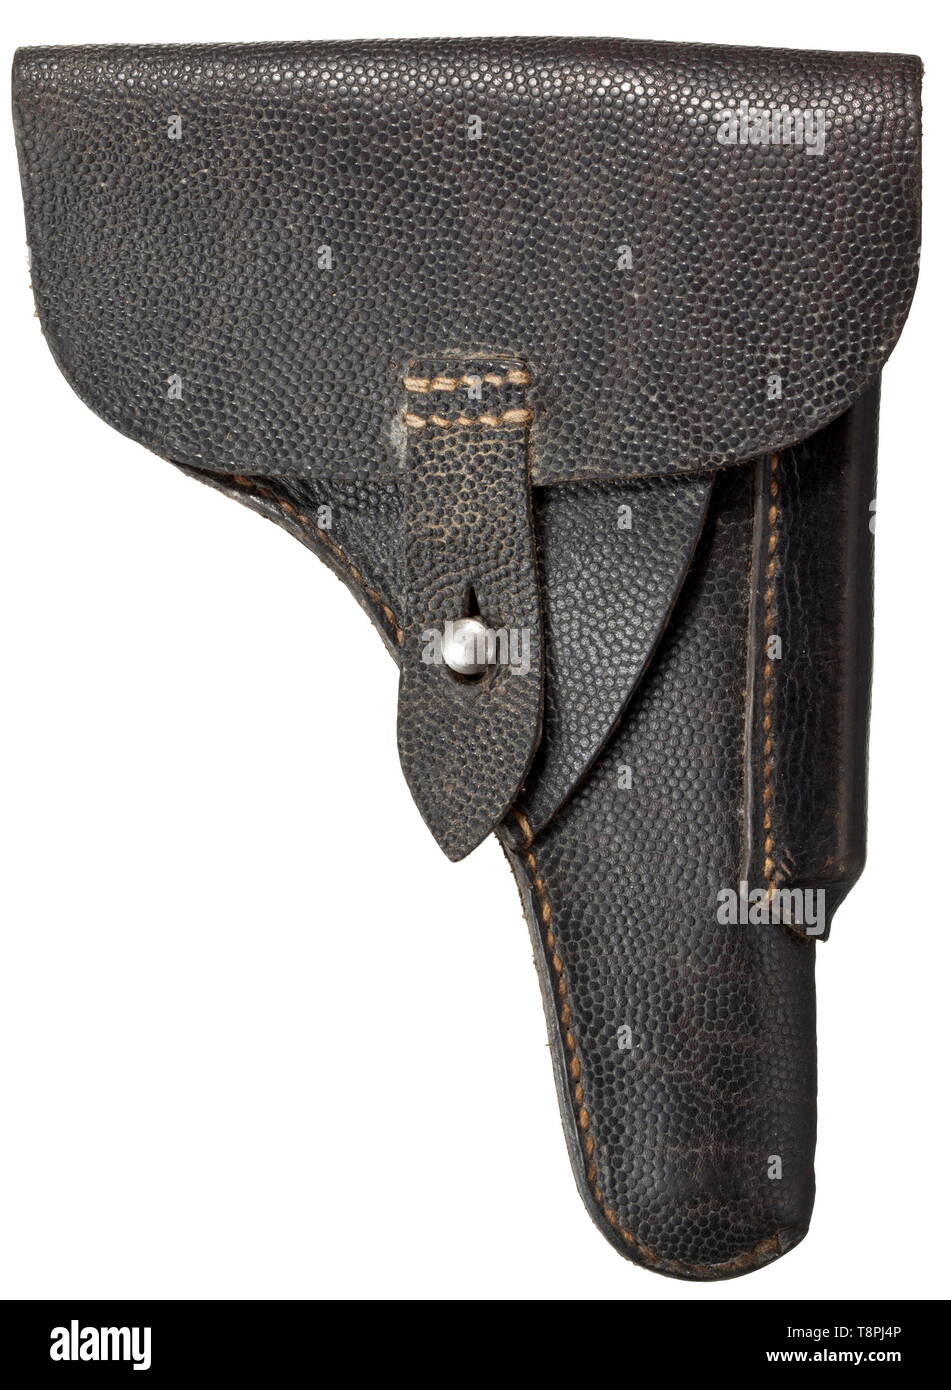 A holster for the FN Mod. 10/22 ca. 1944/45, no encoding but probably from manufacturer Otto Gehrckens, Pinneberg Black calf leather, faint signs of usage. Lateral magazine pocket. Steel closure button. Stitching in order. A rare holster. historic, historical, 20th century, Editorial-Use-Only Stock Photo